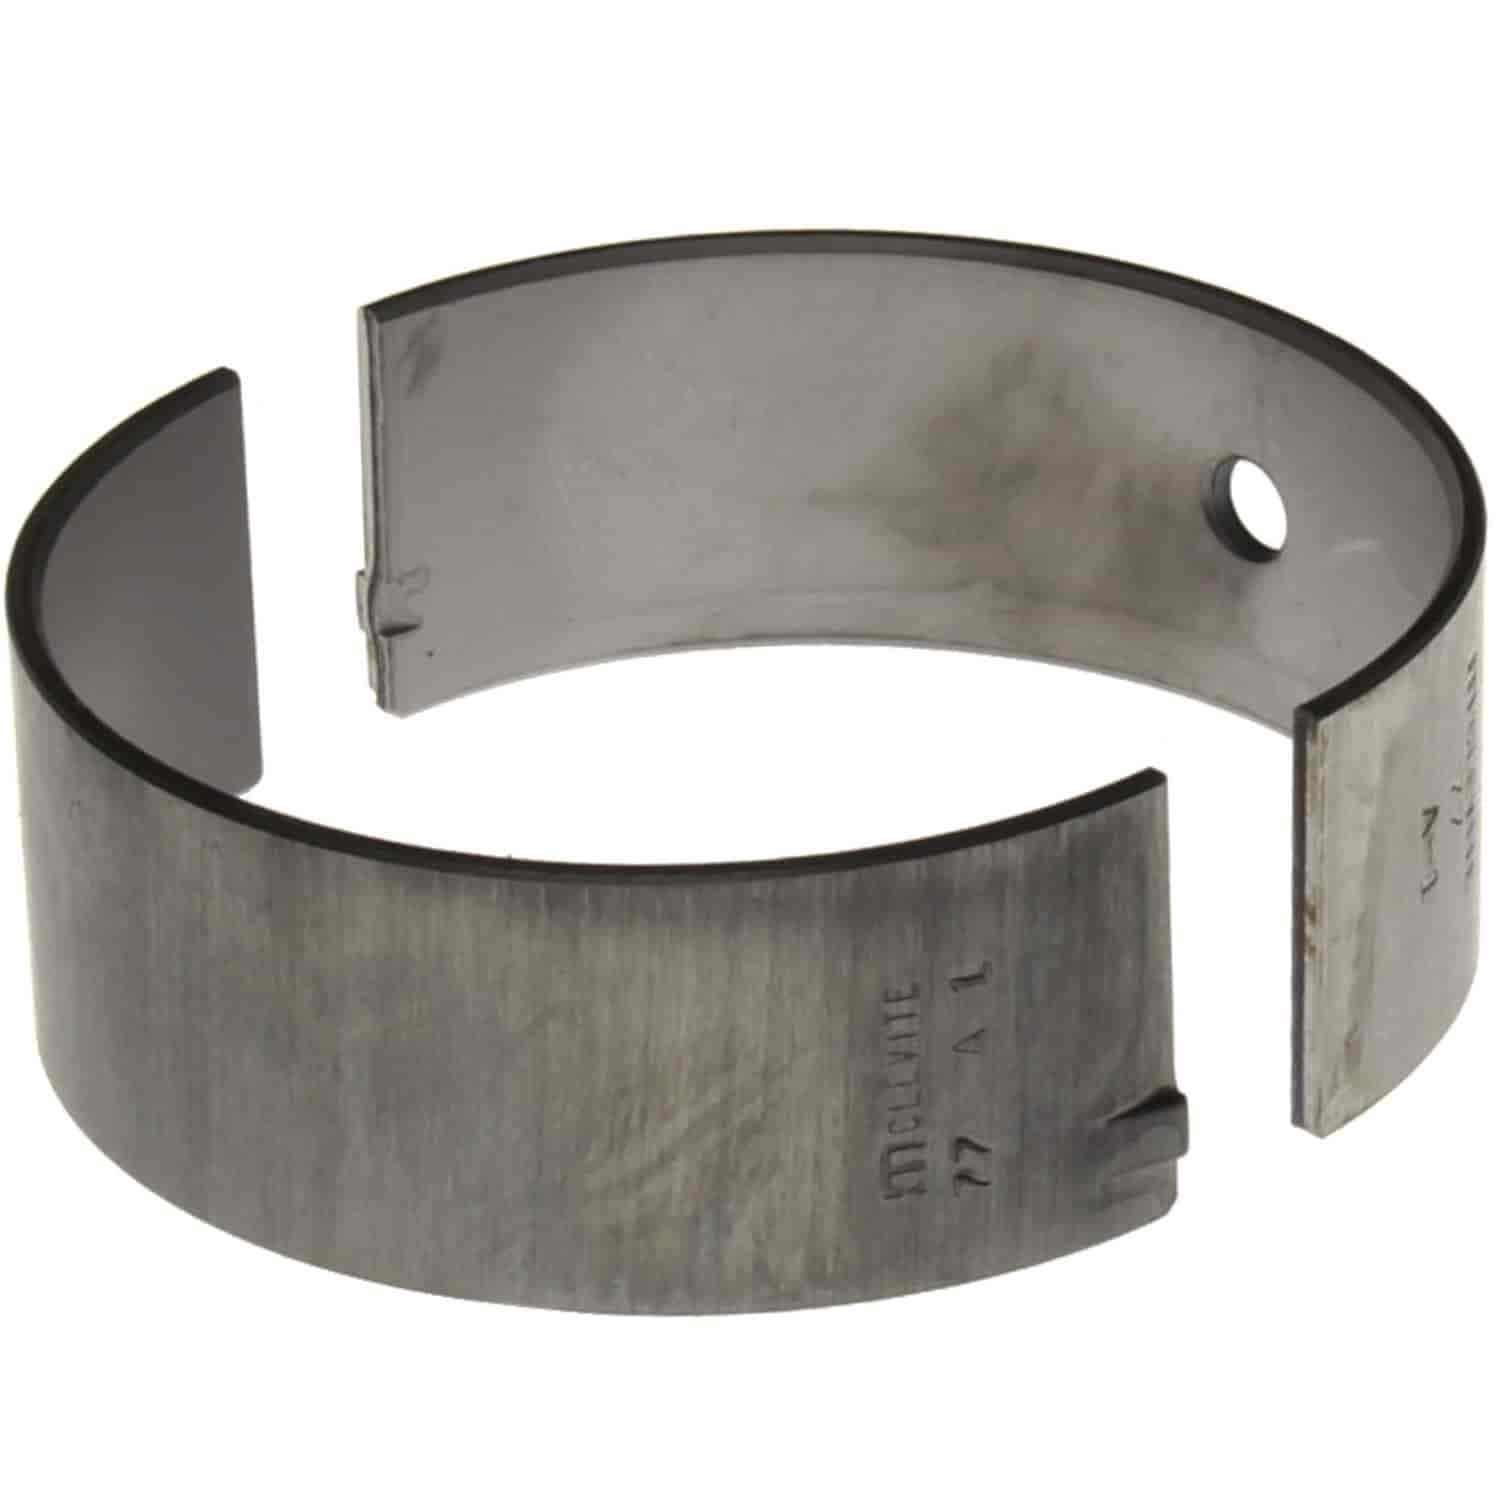 Connecting Rod Bearing Chevy 1958-2007 V8 348/366/396/402/409/427/454/496ci (8.1L) with Standard Size